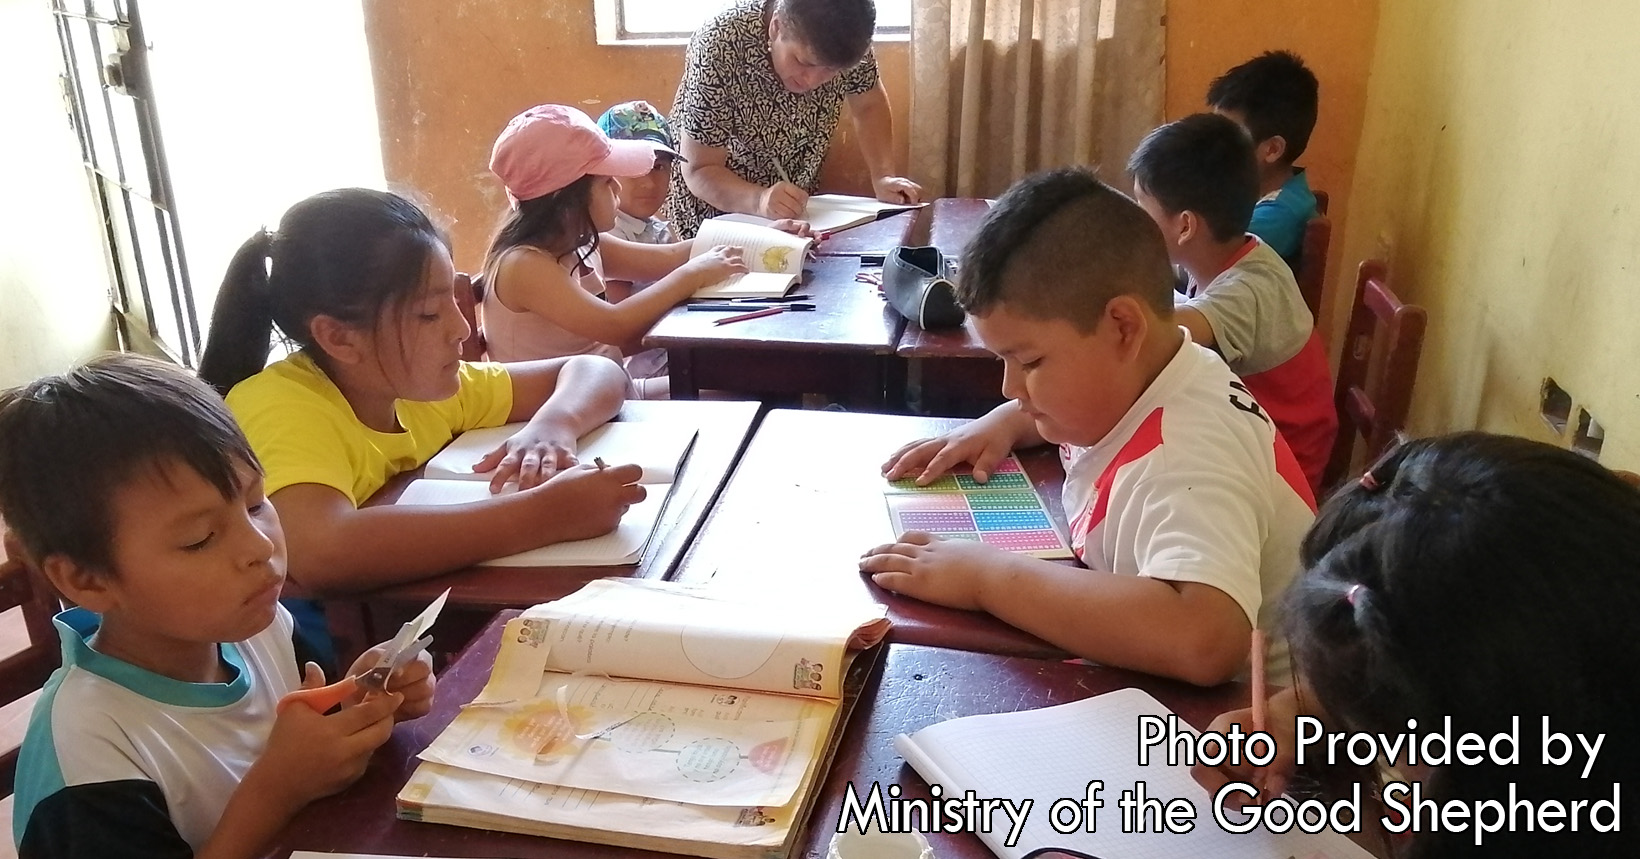 In this Child Care Center, the young kids are grouped into fours each having their own individual desk. The eight kids are reading & writing during the day to learn more and to grow into young adults.